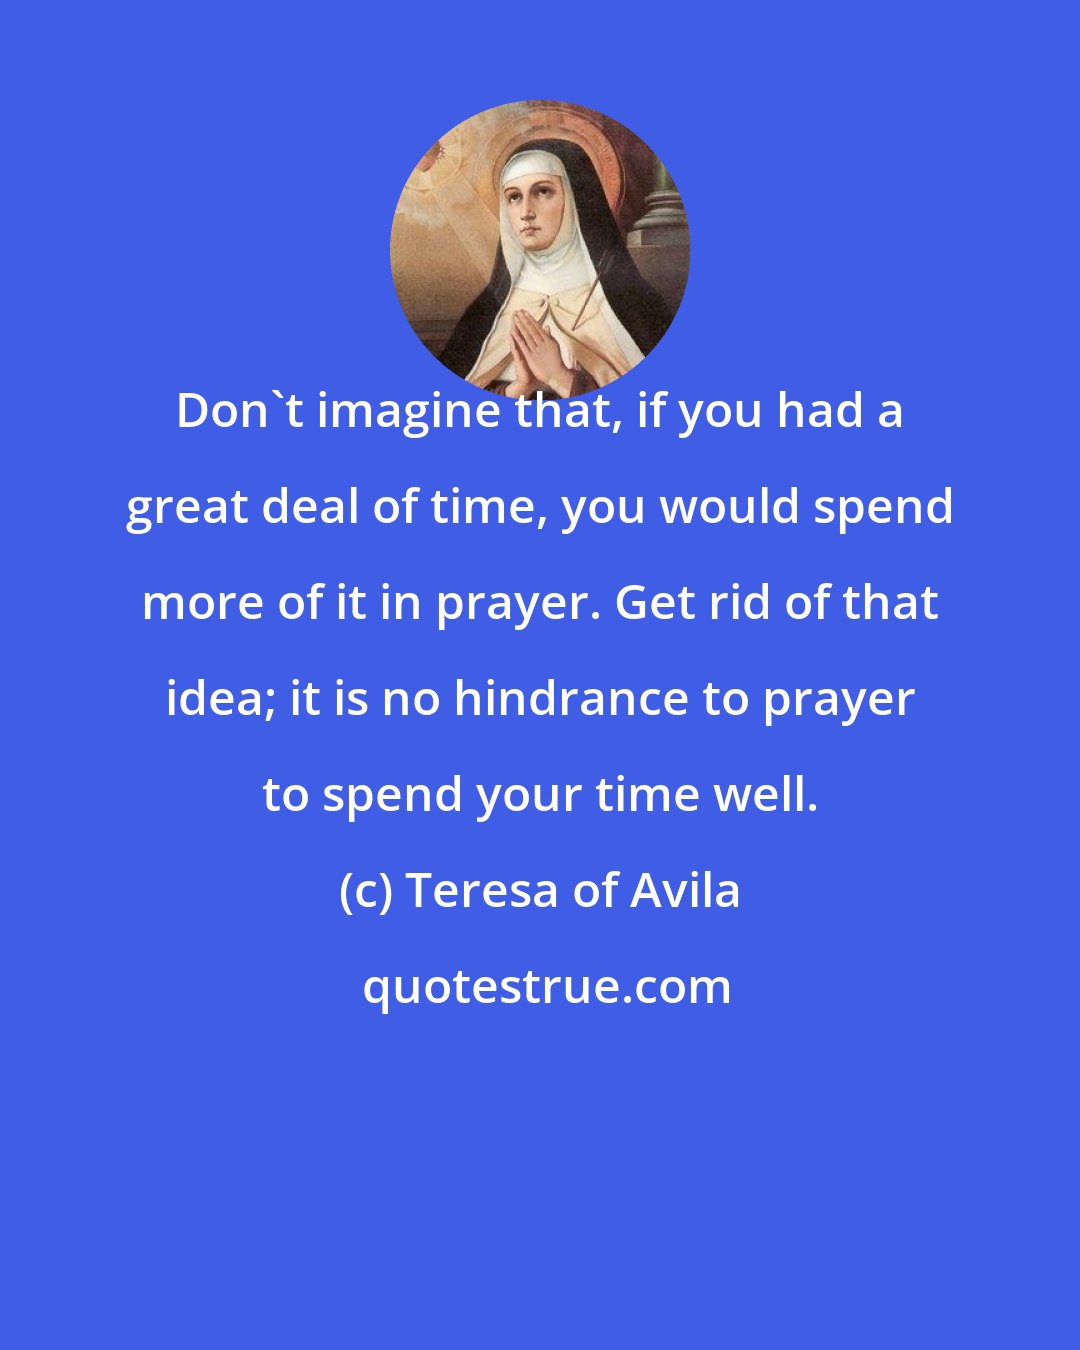 Teresa of Avila: Don't imagine that, if you had a great deal of time, you would spend more of it in prayer. Get rid of that idea; it is no hindrance to prayer to spend your time well.